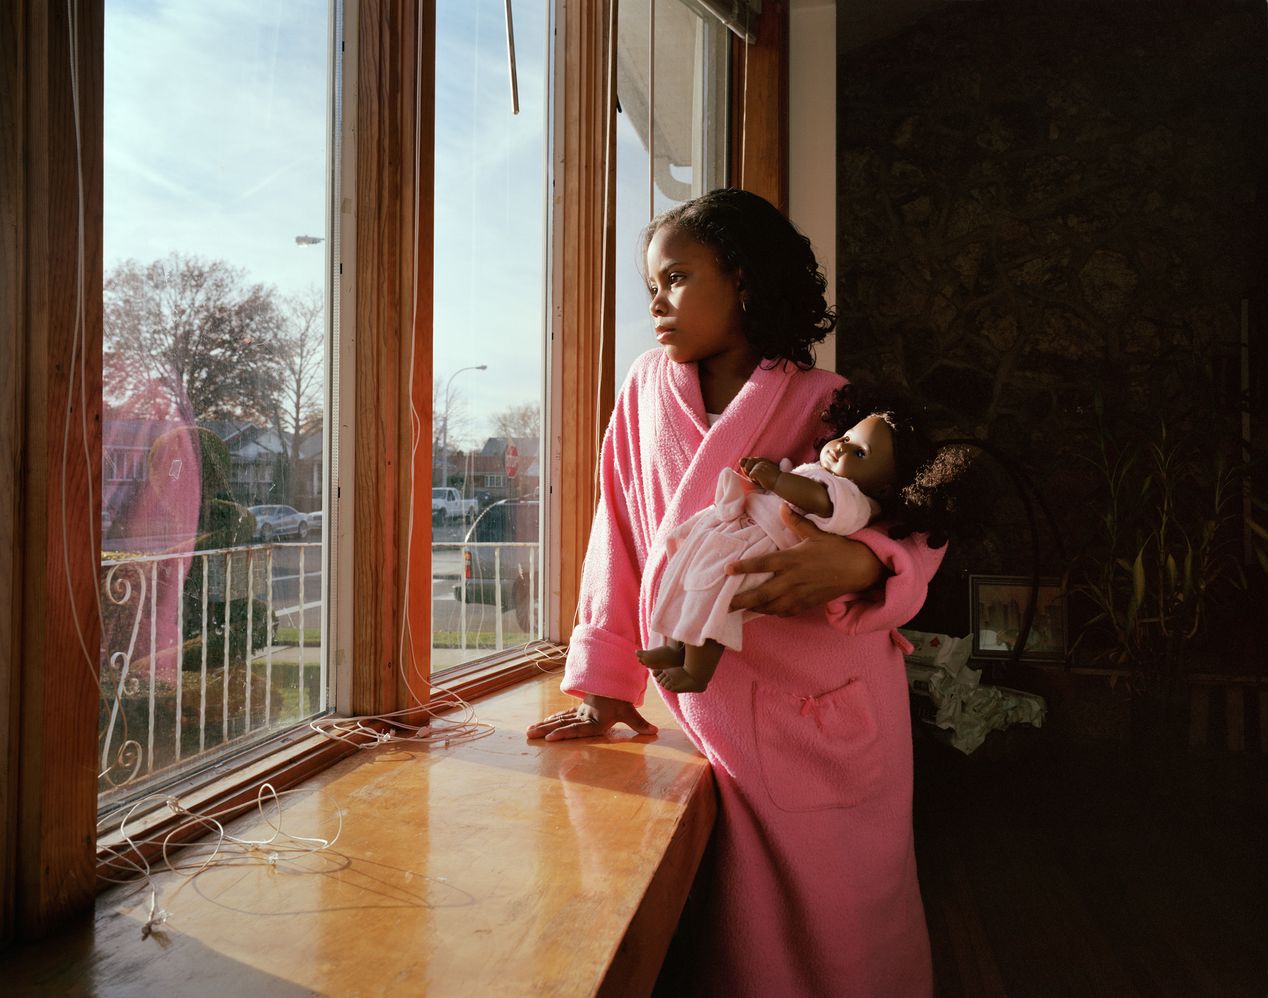 Young girl in a pink robe is holding her lookalike doll and looking out the window, environmental portrait photography, Ilona Szwarc, contemporary Los Angeles artist.